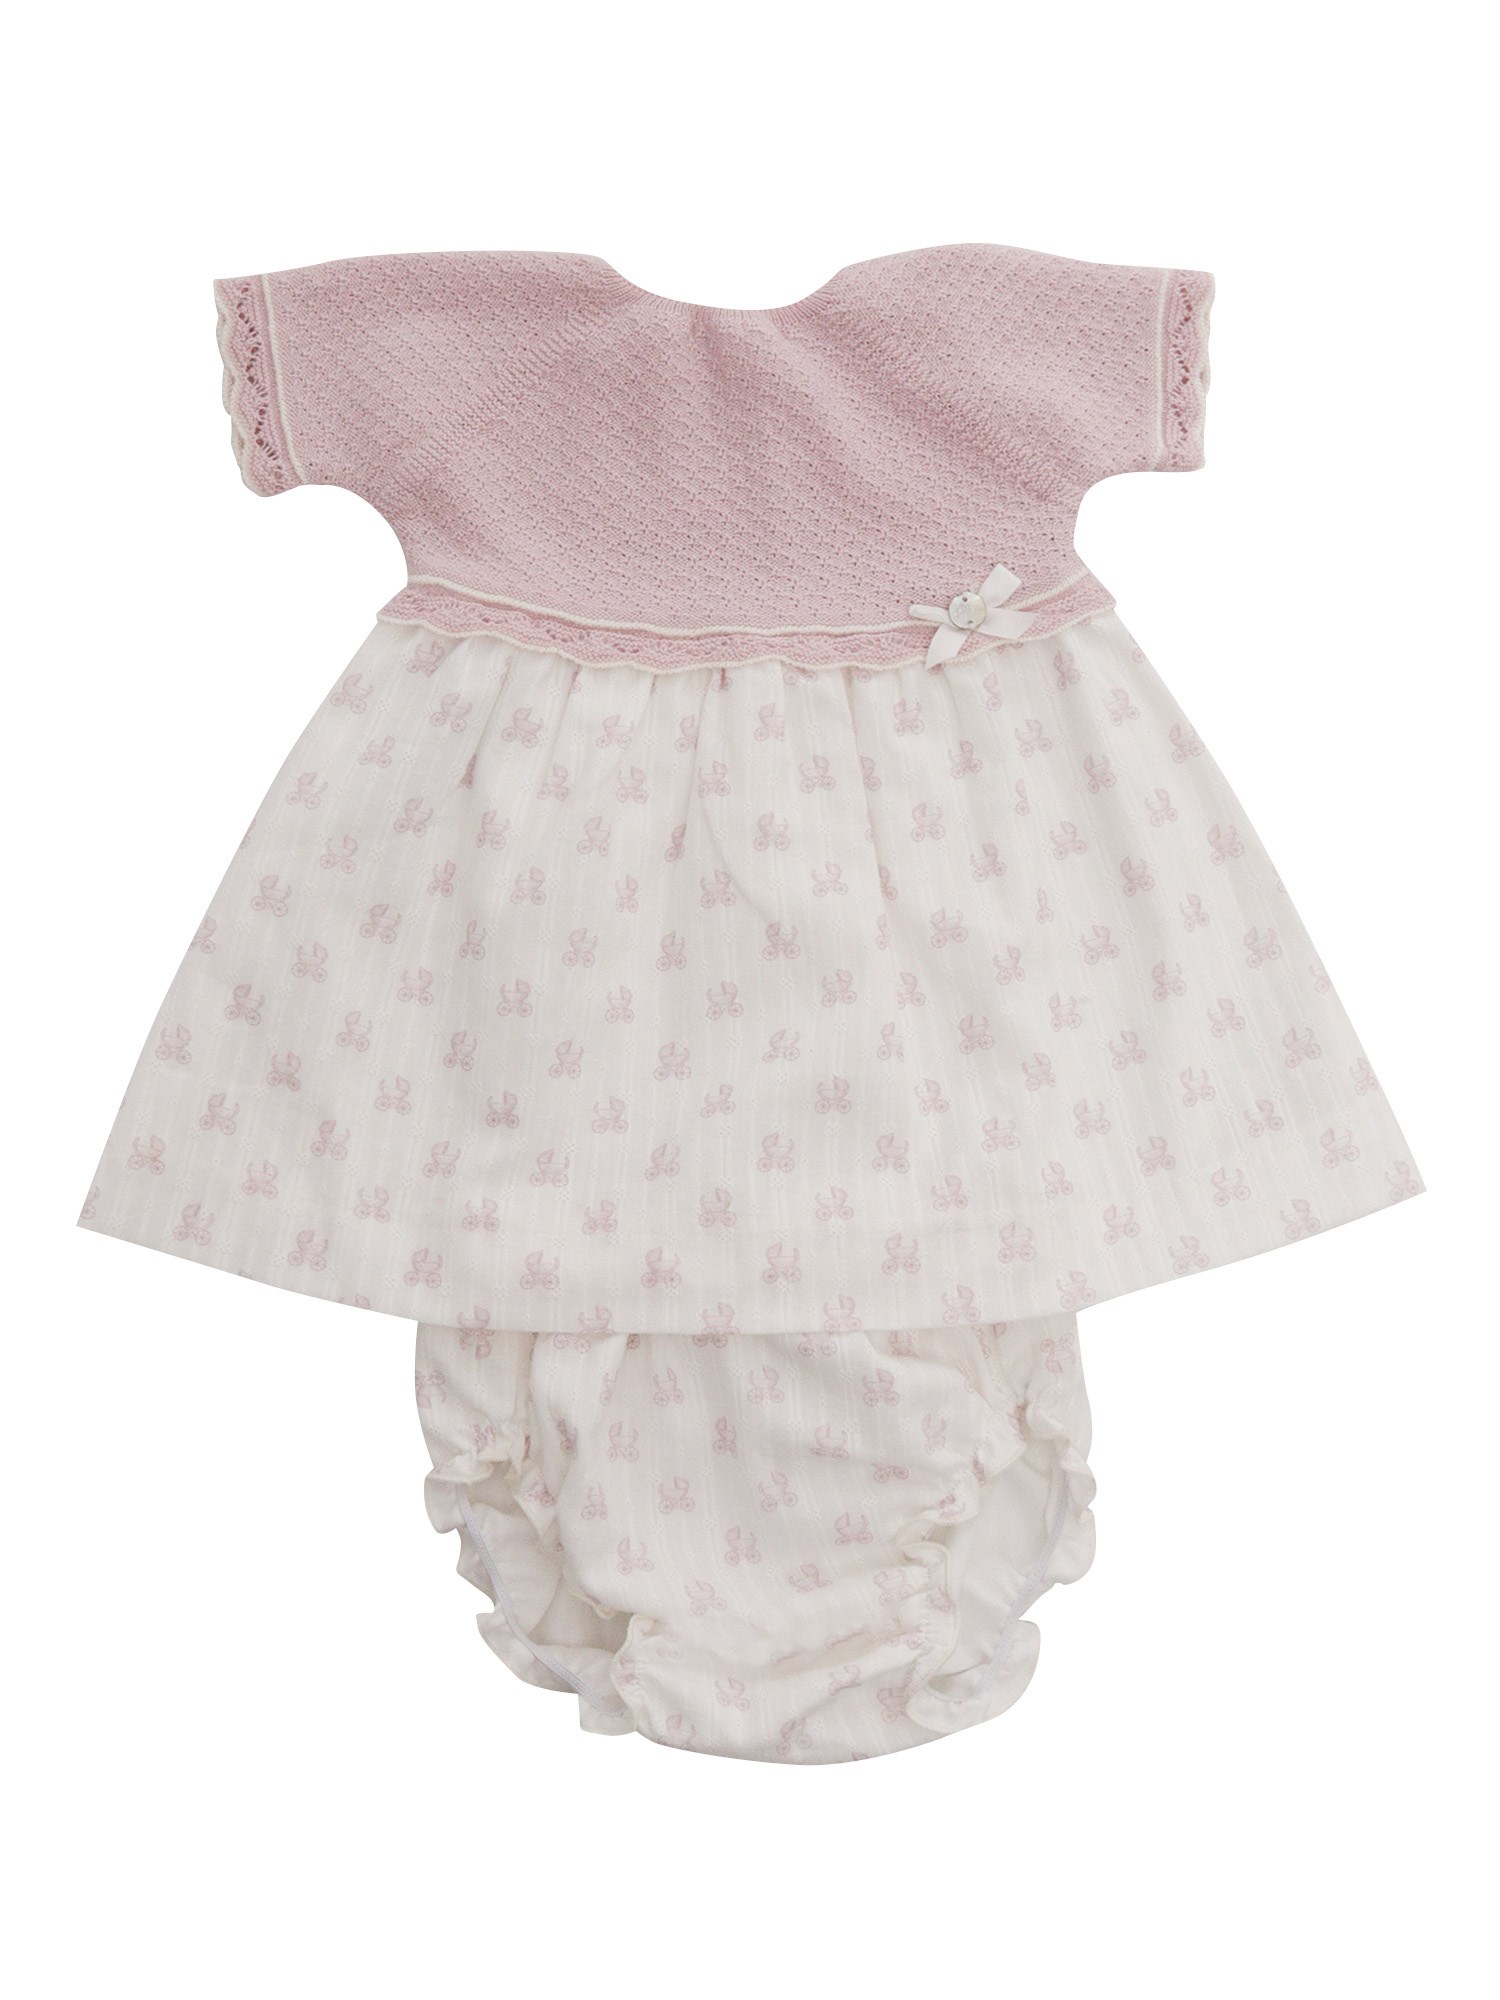 Paz Rodriguez Babies' Mecer Pink And White Dress